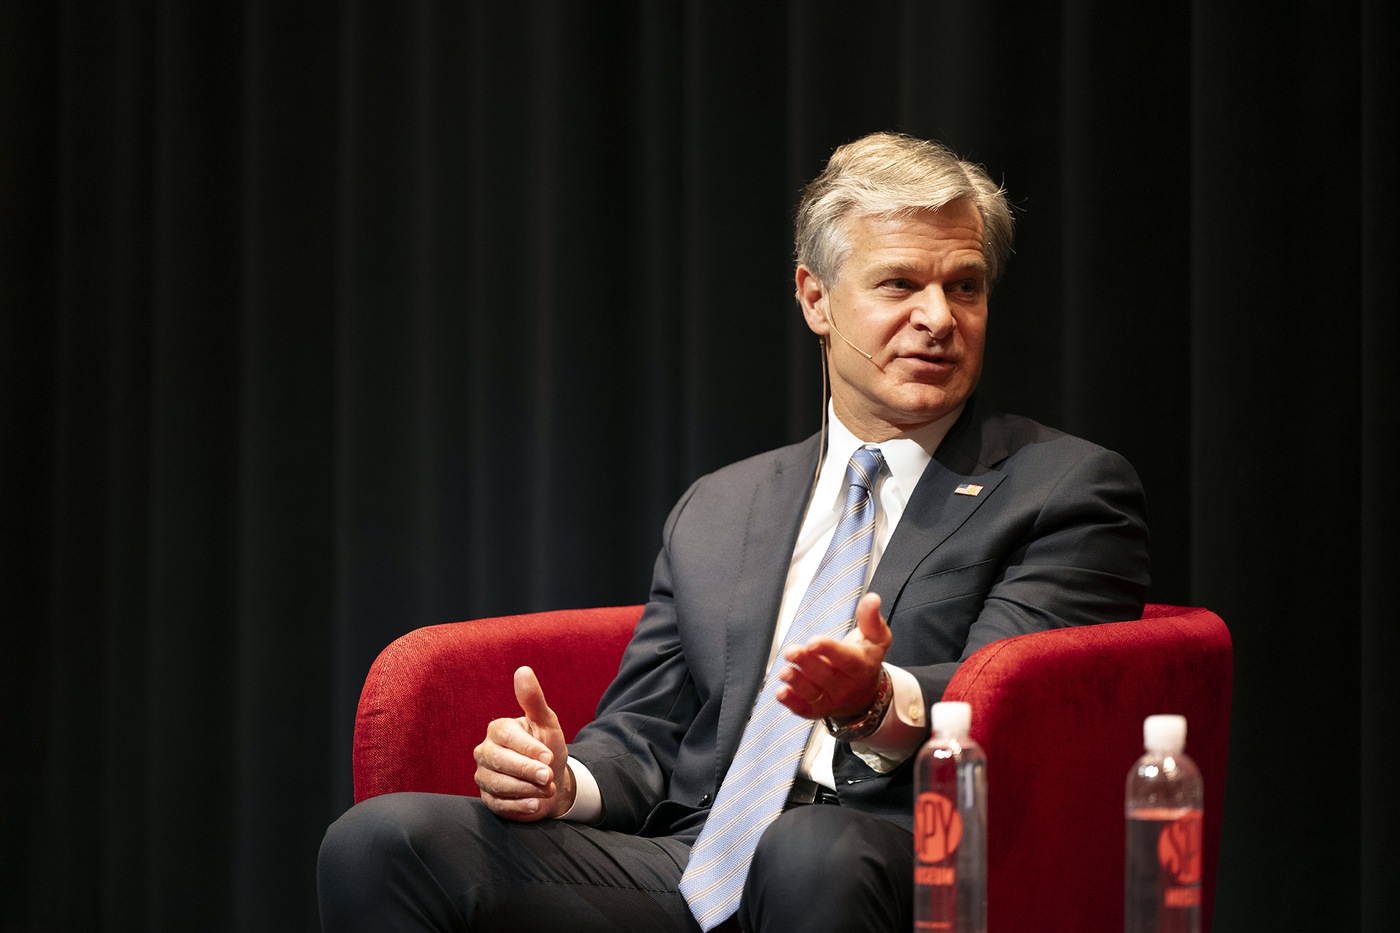 FBI Director Christopher Wray participated in a wide-ranging discussion at the International Spy Museum